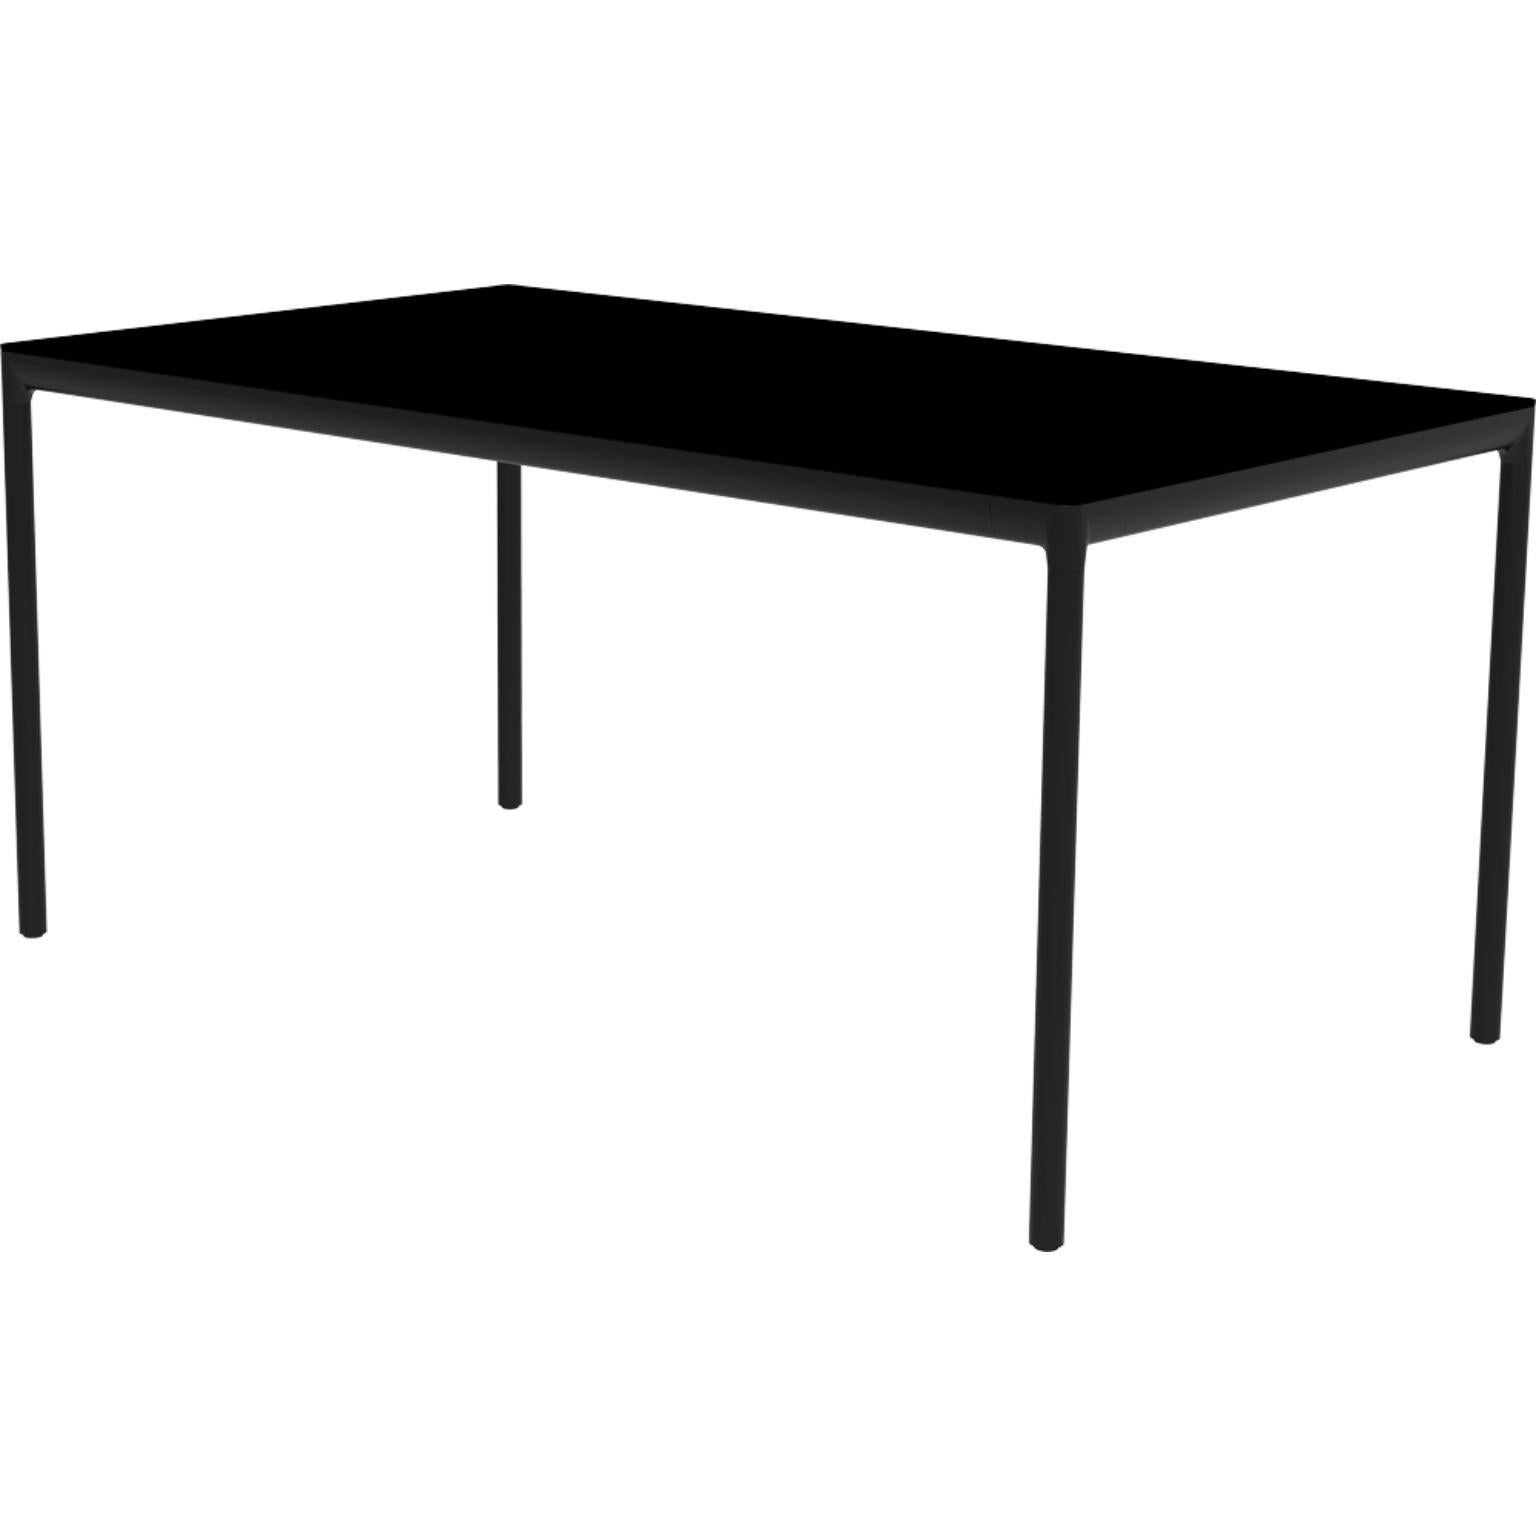 Ribbons Black 160 Coffee Table by MOWEE.
Dimensions: D90 x W160 x H75 cm.
Material: Aluminum and HPL top.
Weight: 21 kg.
Also available in different colors and finishes. (HPL Black Edge or Neolith top).

An unmistakable collection for its